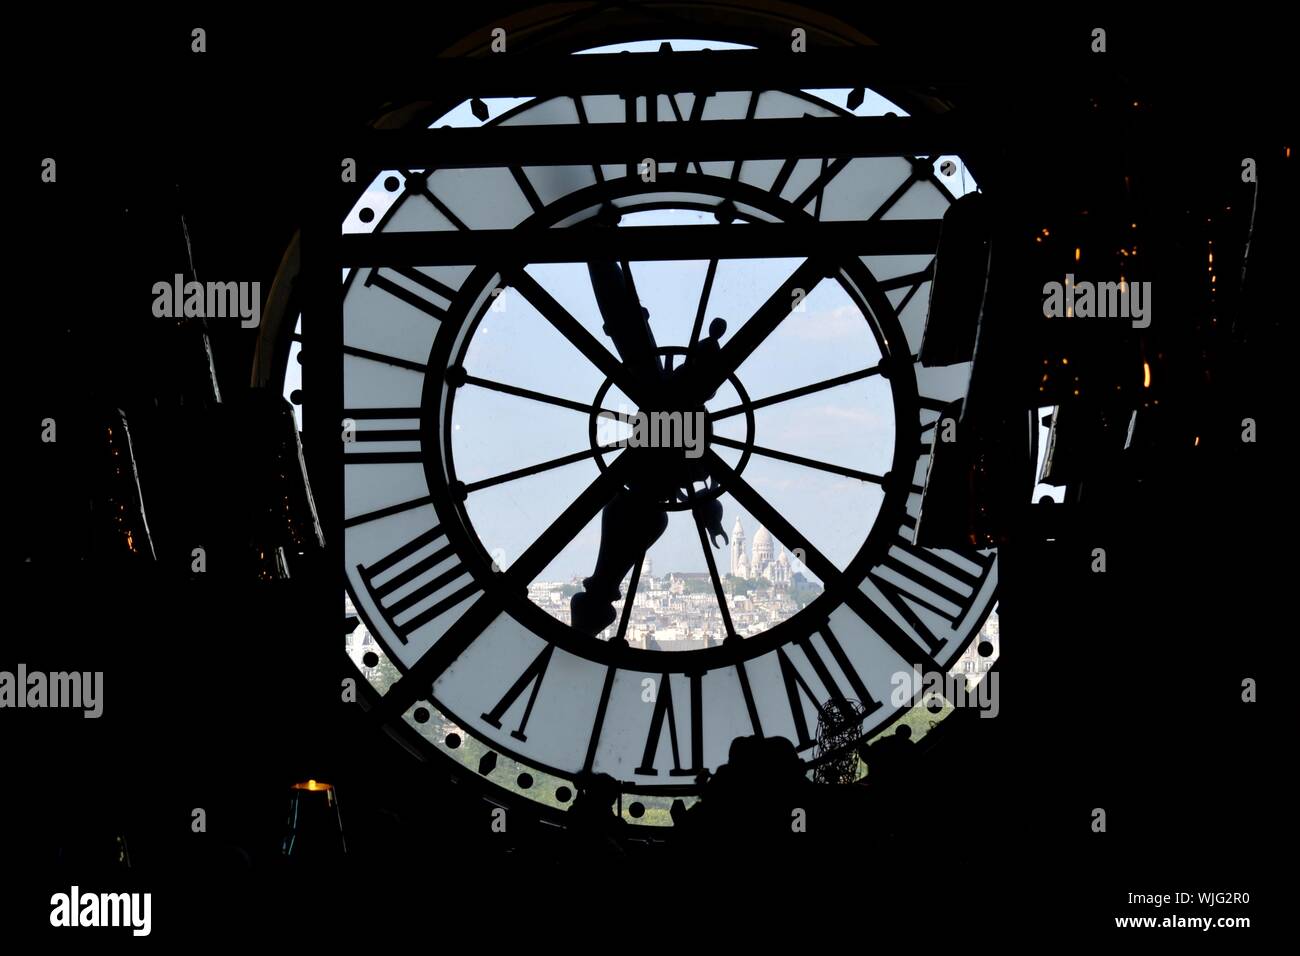 View From Behind A Clockface Stock Photo